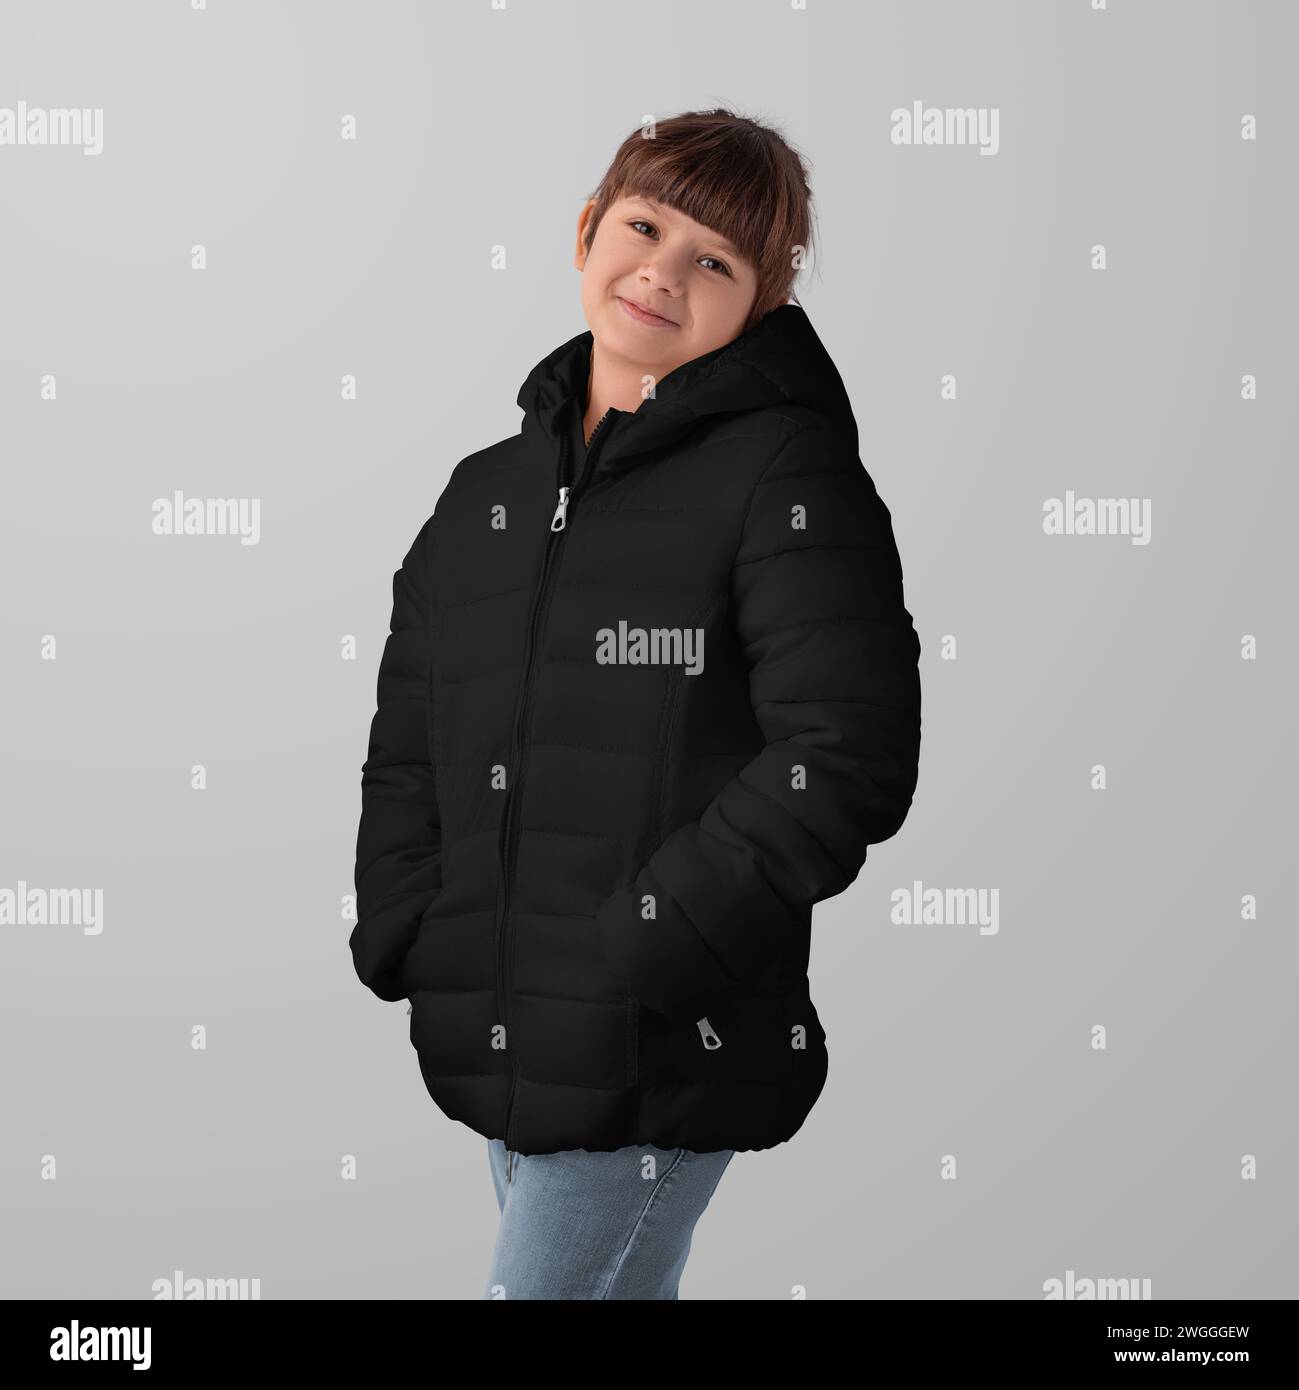 Mockup of a black winter puffer jacket on a child, garment zippers up, hands in pockets, front view, space for design, branding. Template fashionable Stock Photo